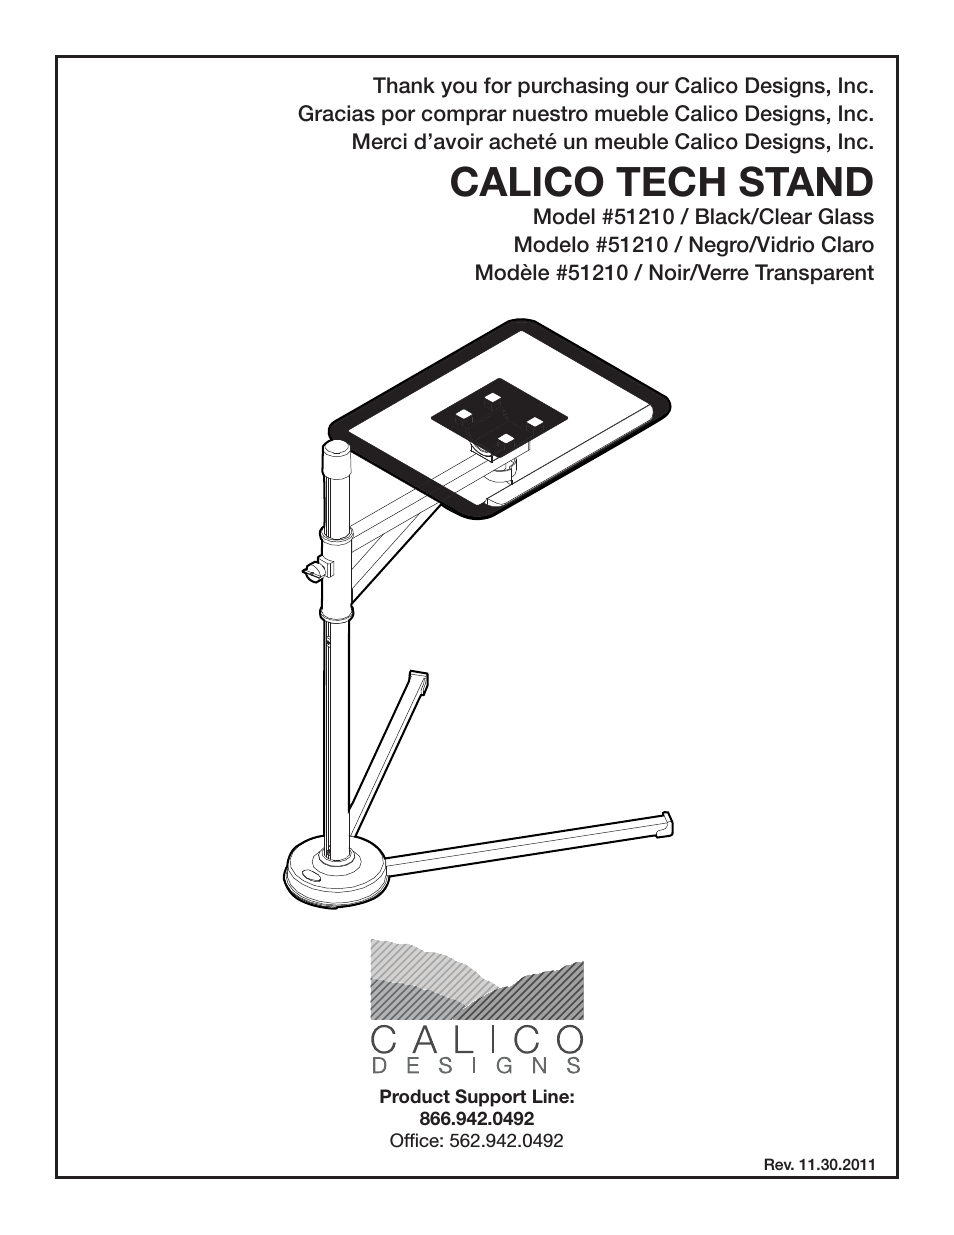 Calico Tech Stand with Glass